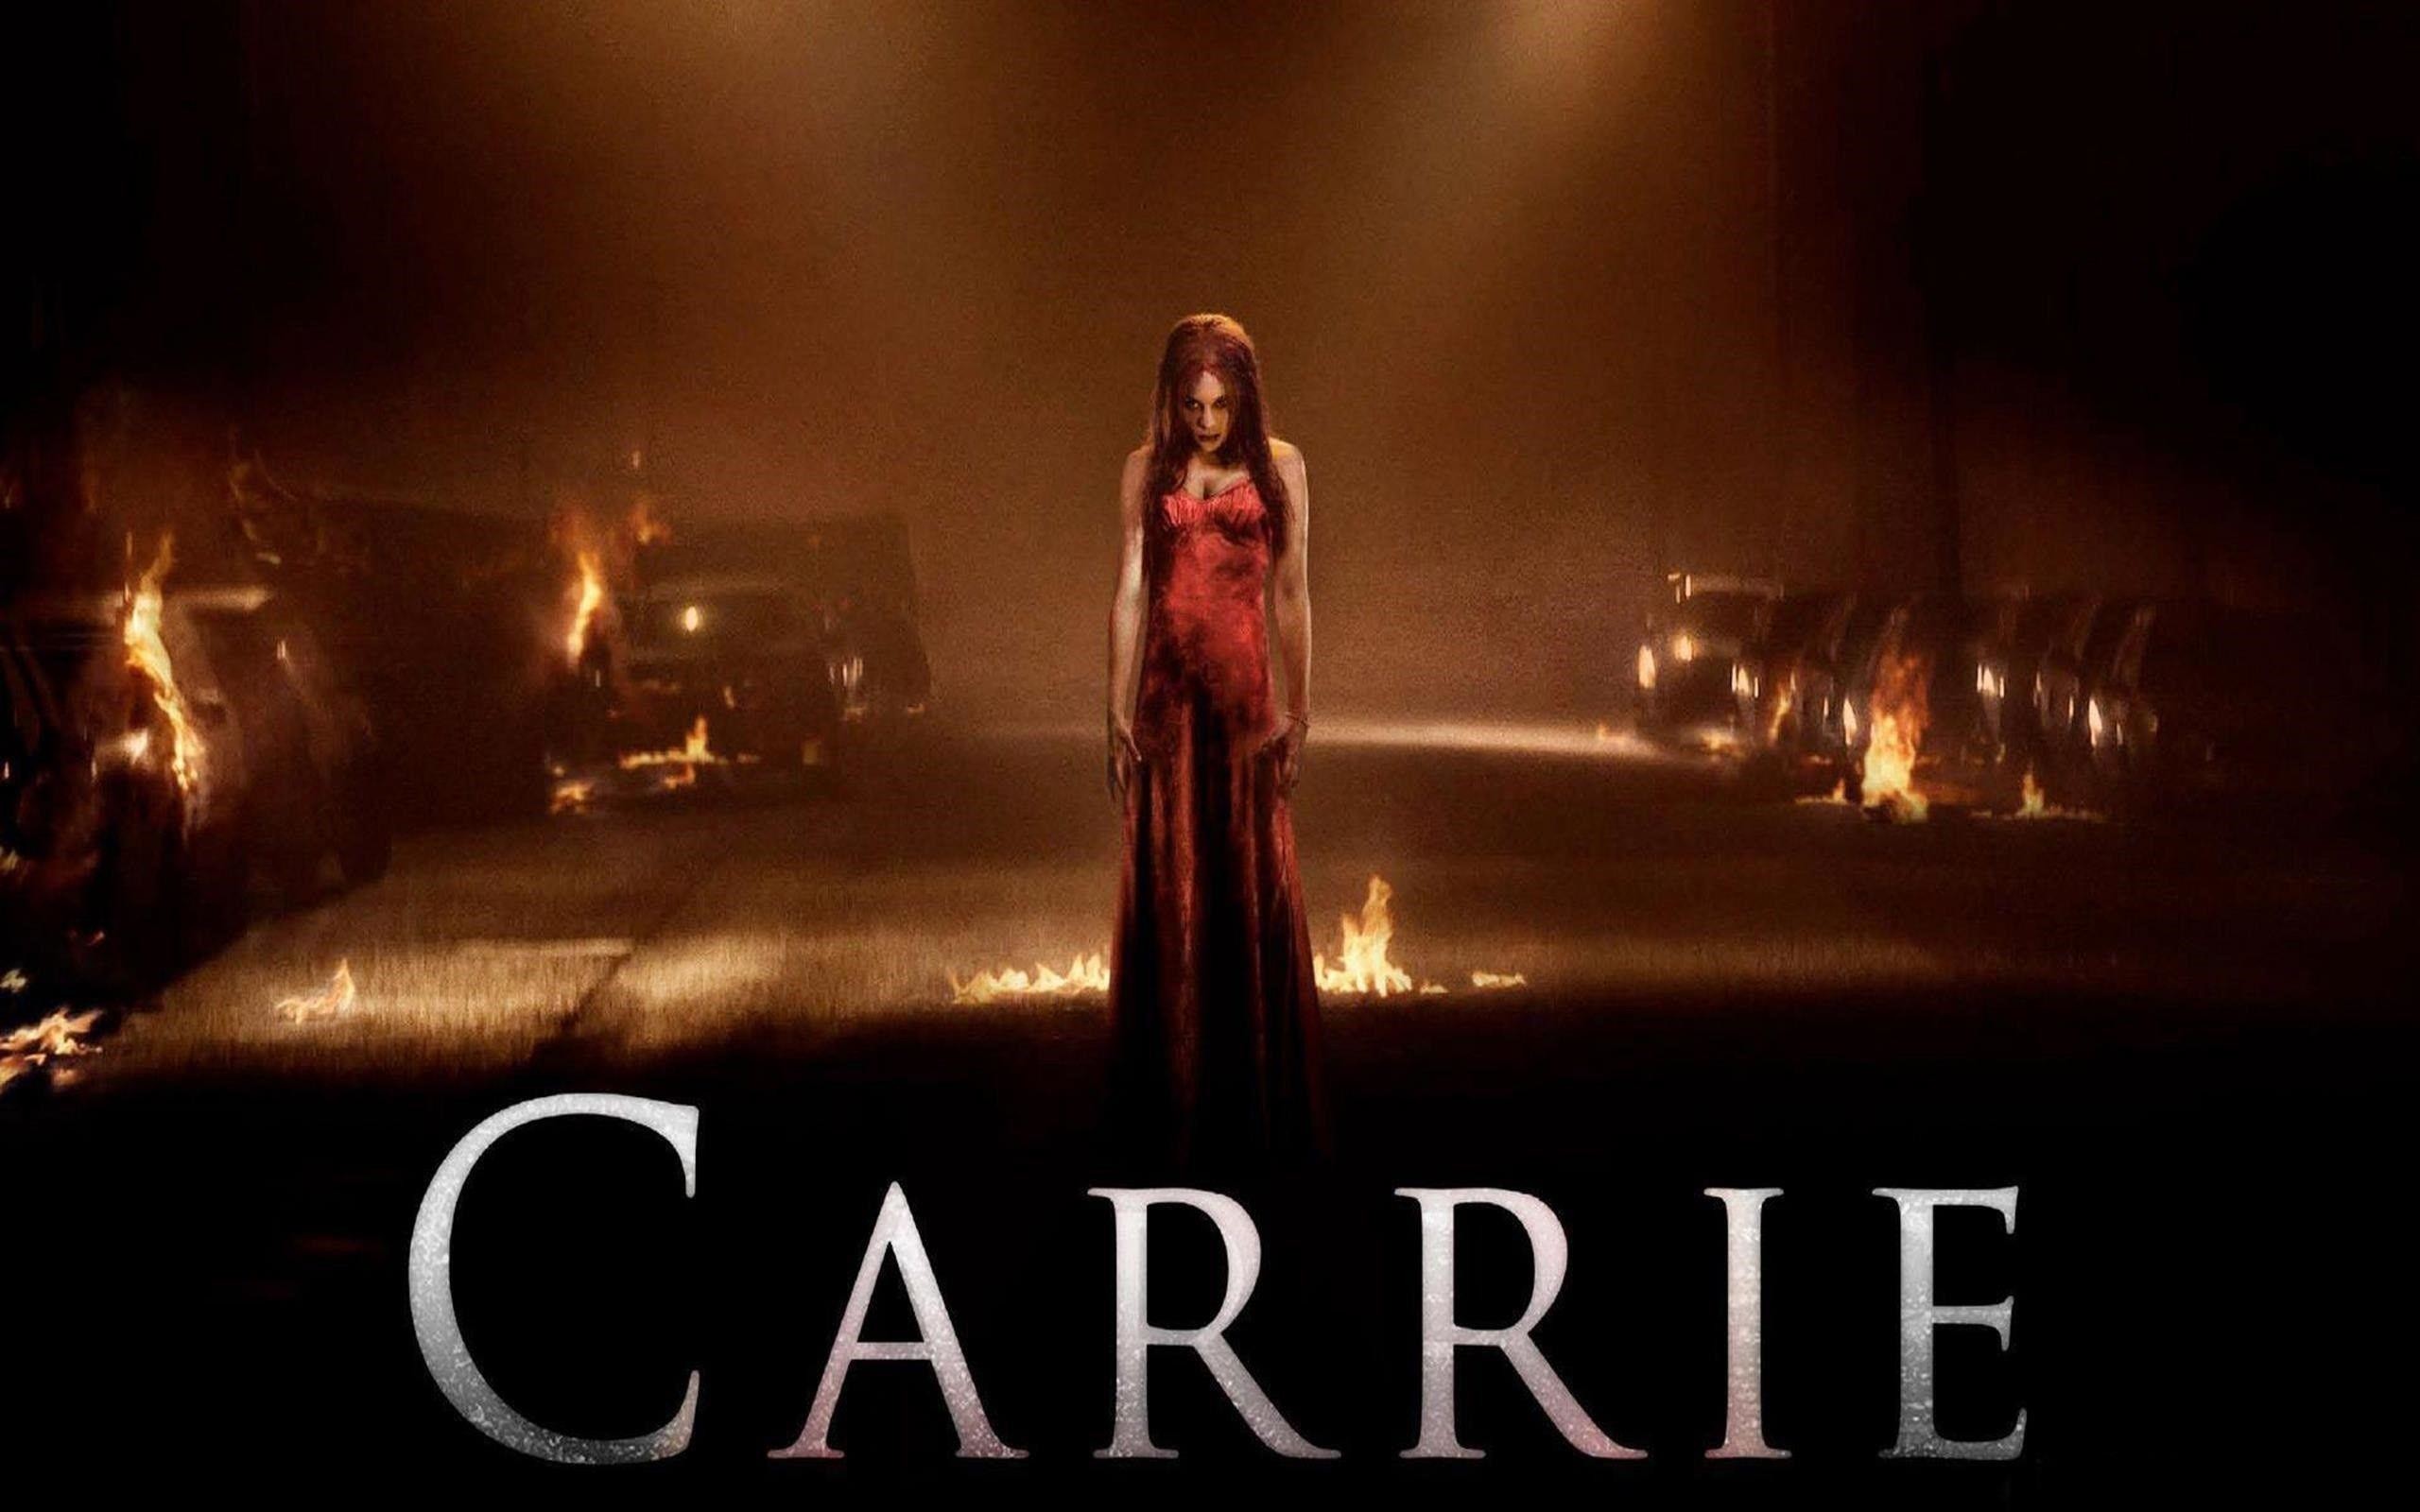 2560x1600 Carrie Hollywood Horror Movie HD Wallpaper Desktop Backgrounds Free